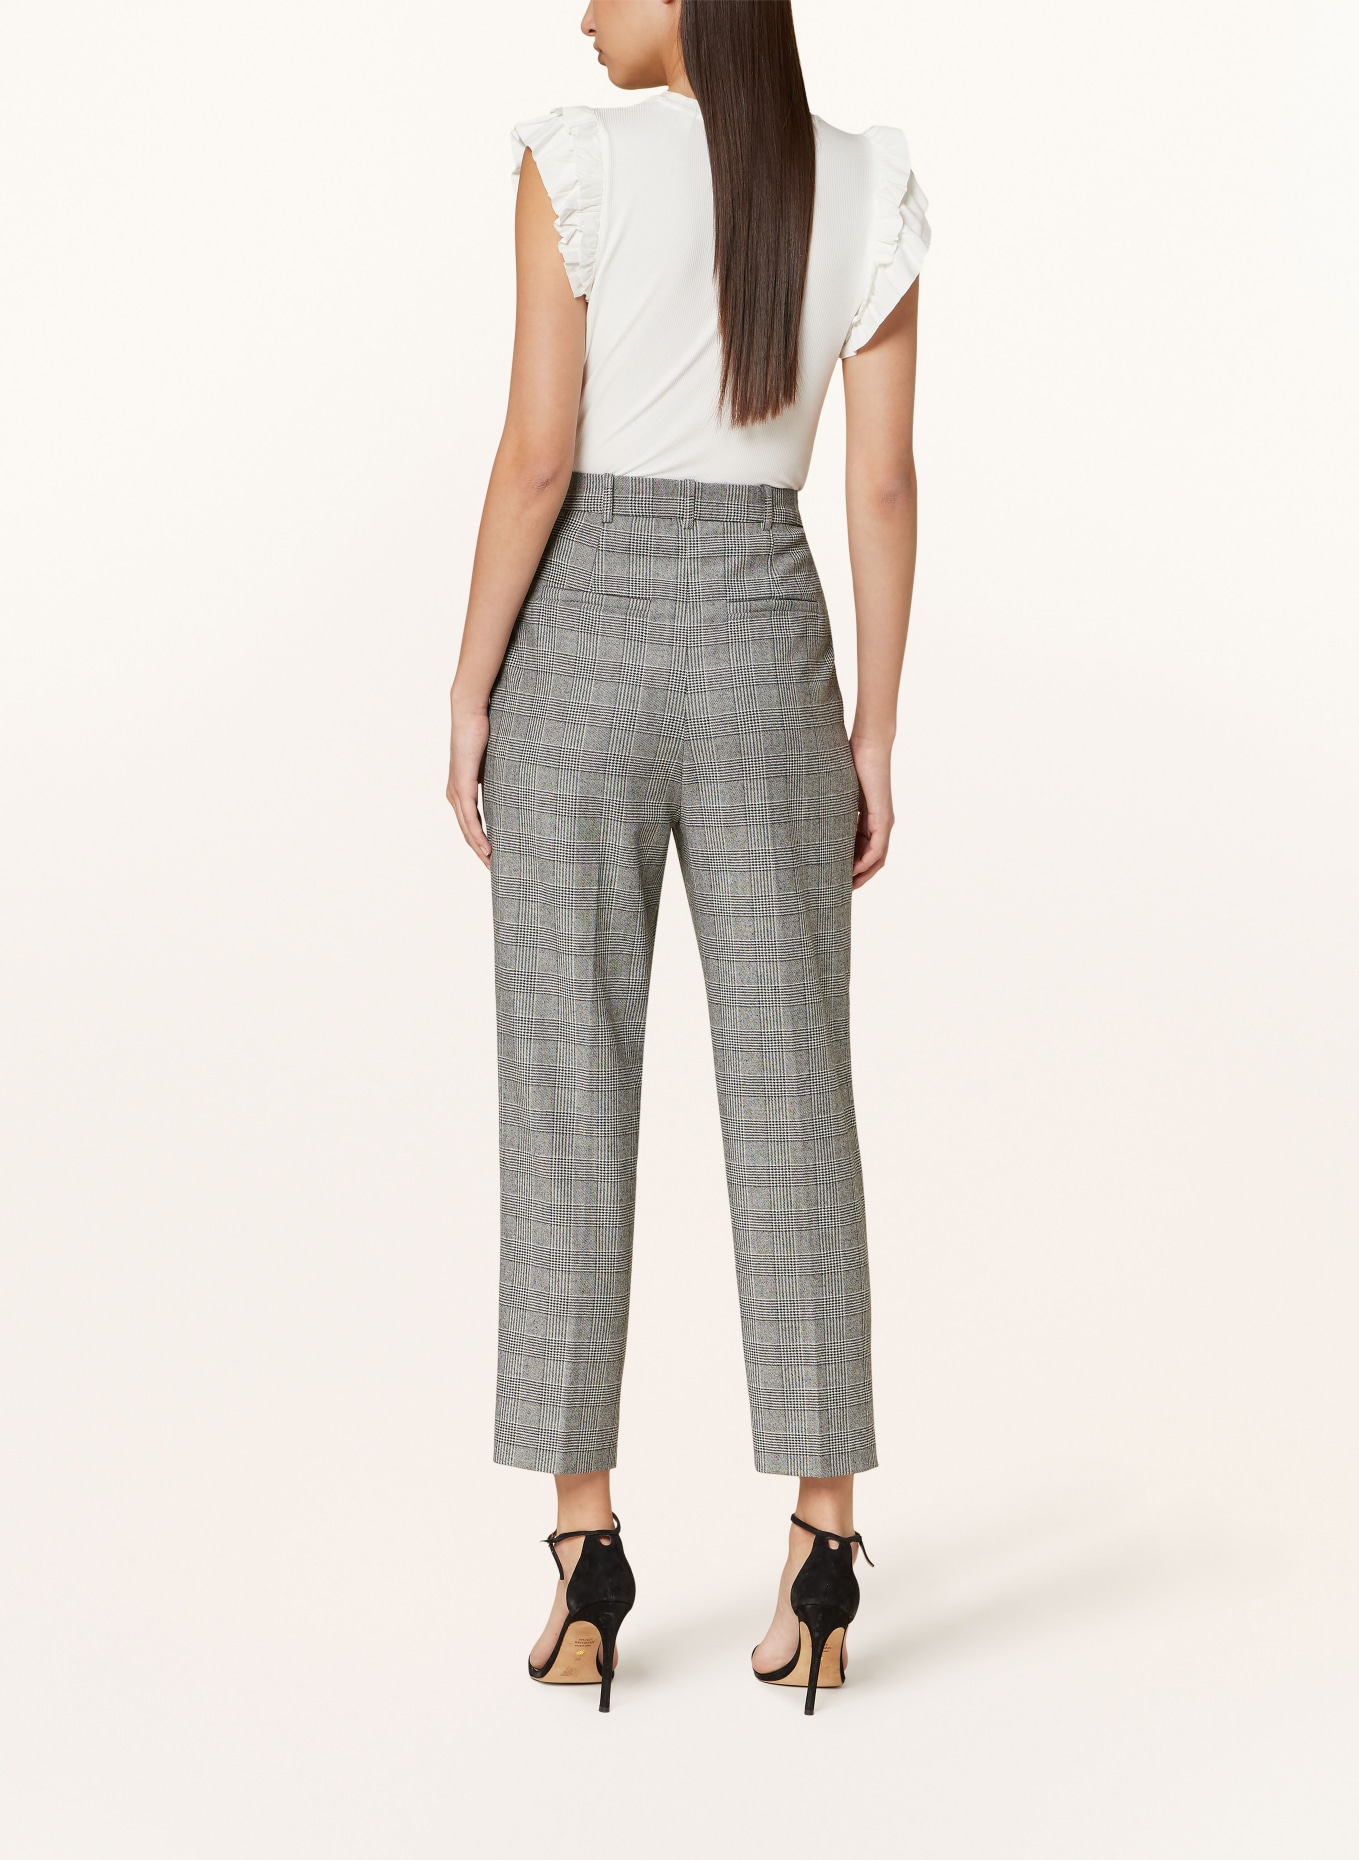 TED BAKER Trousers JOMMIAL, Color: GRAY/ LIGHT GRAY/ BLACK (Image 3)